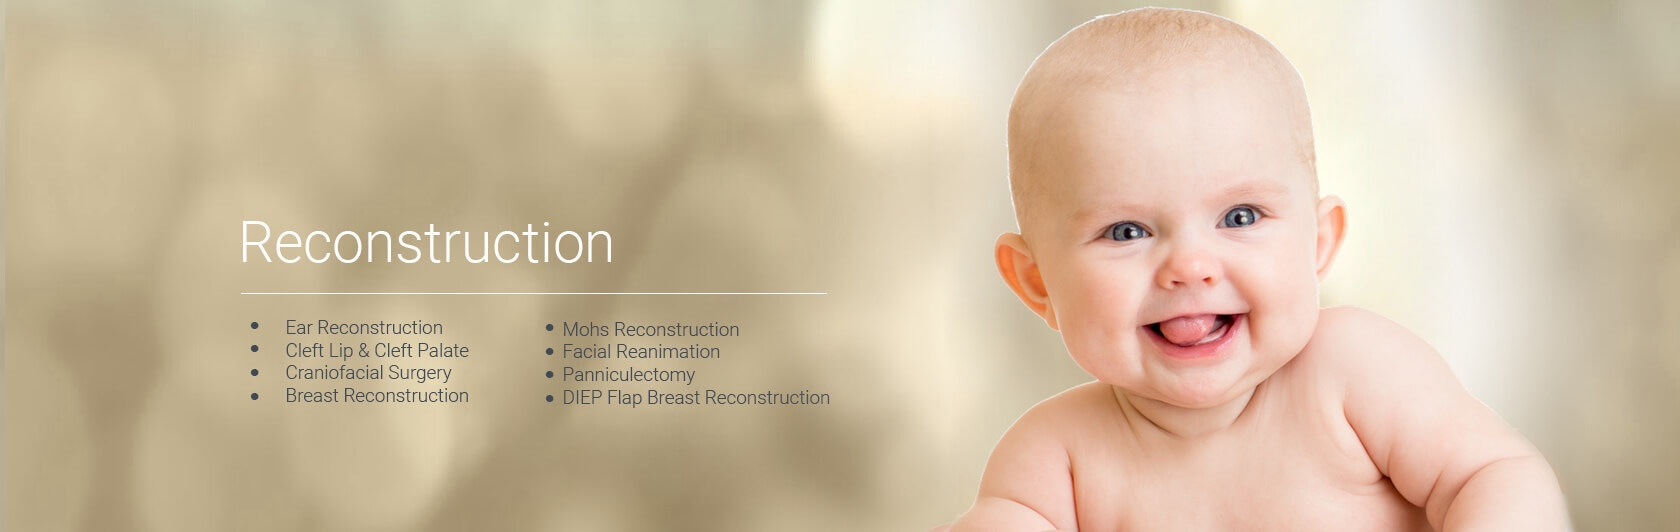 Reconstruction Cleft Lip and Cleft Palate